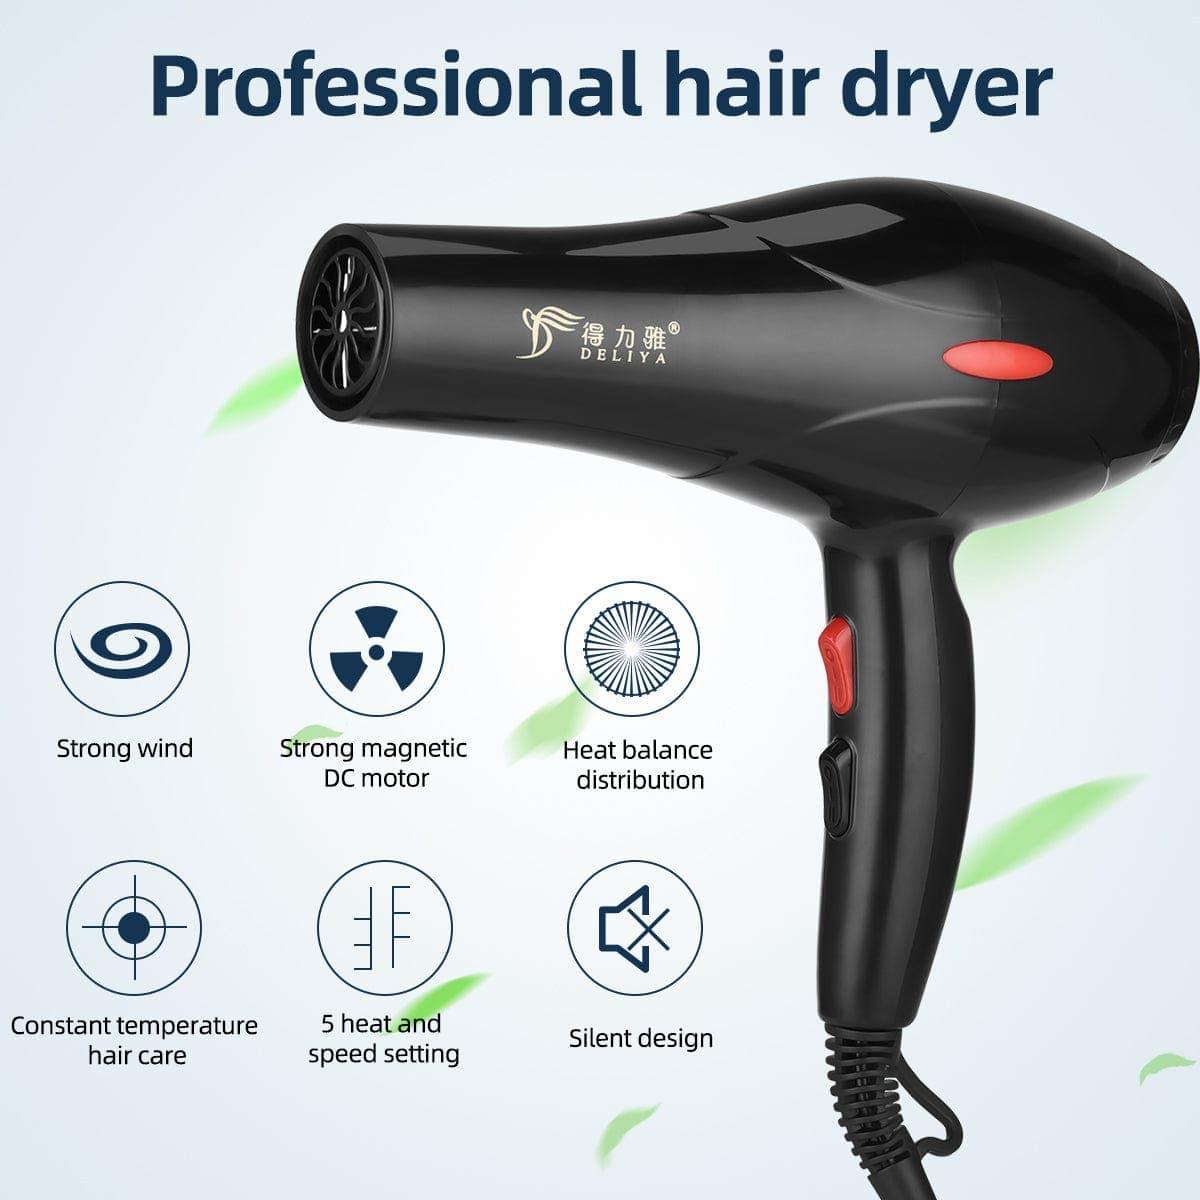 2200W Professional Hair Dryers Strong Power Blow Dryer Barber Salon Styling Tool With 3 Temperature 2 Speed Personal Care - Ammpoure Wellbeing